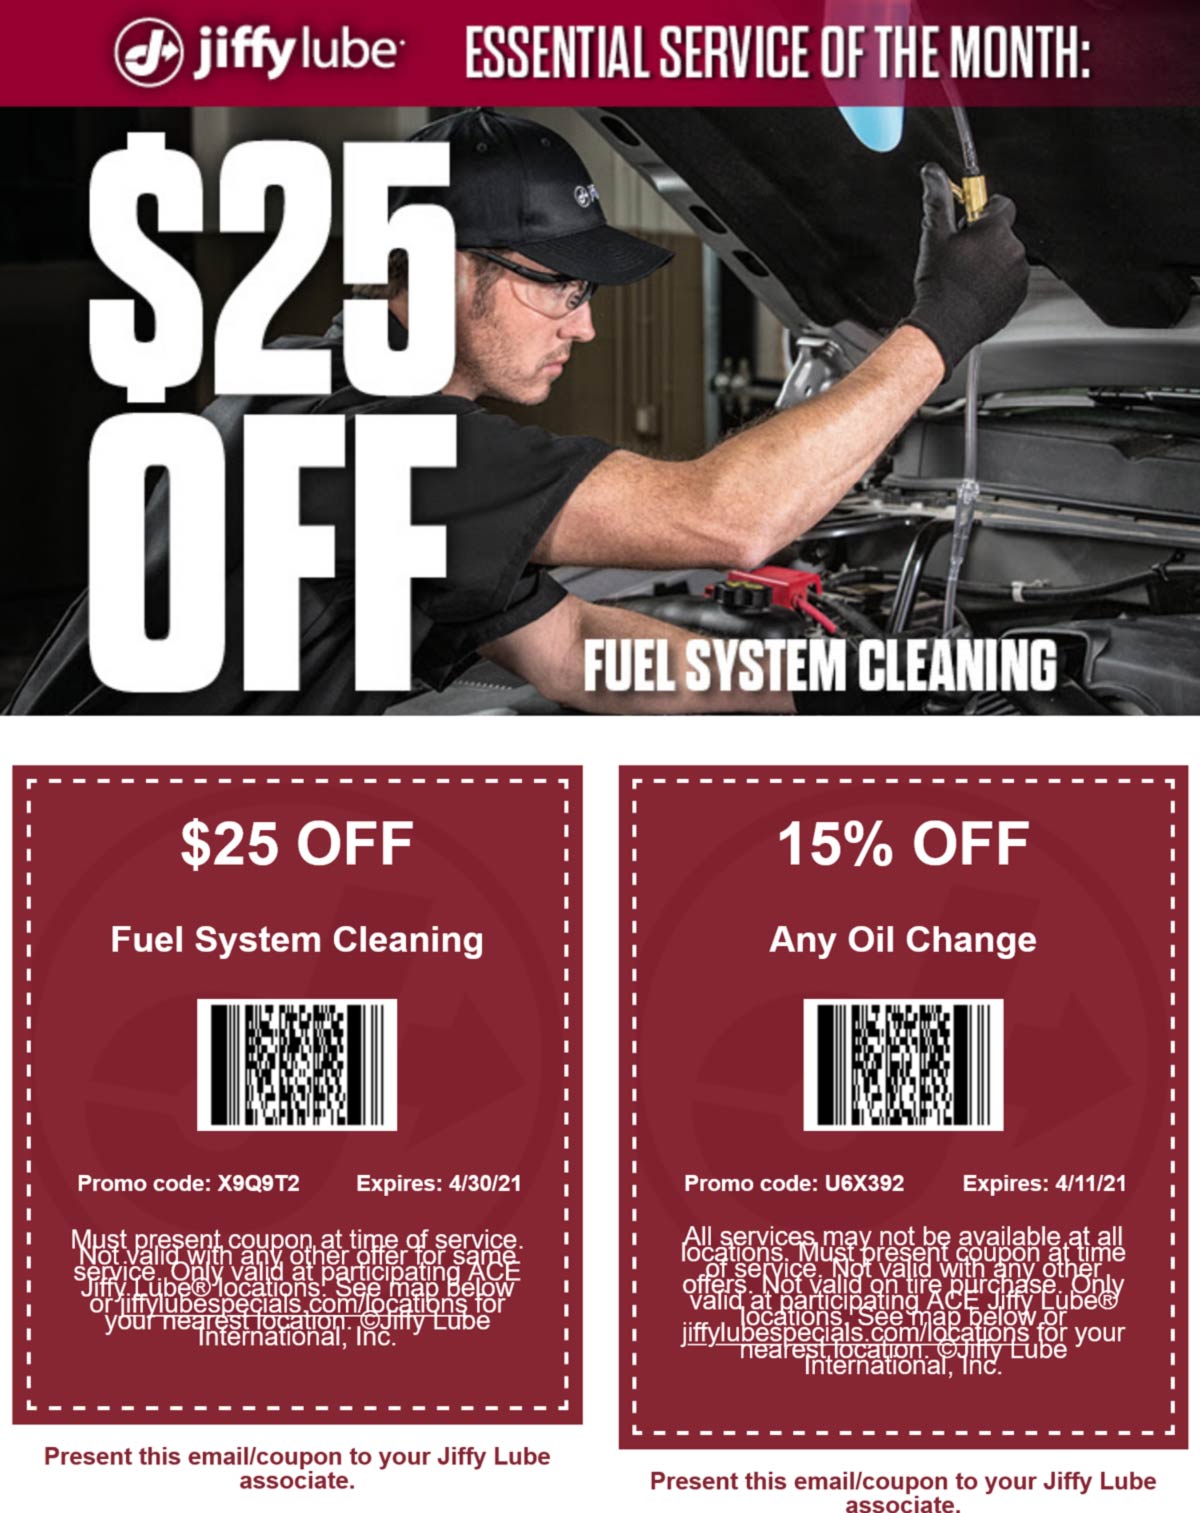 Jiffy Lube stores Coupon  15% off any oil change & $25 off fuel system cleaning at Jiffy Lube #jiffylube 